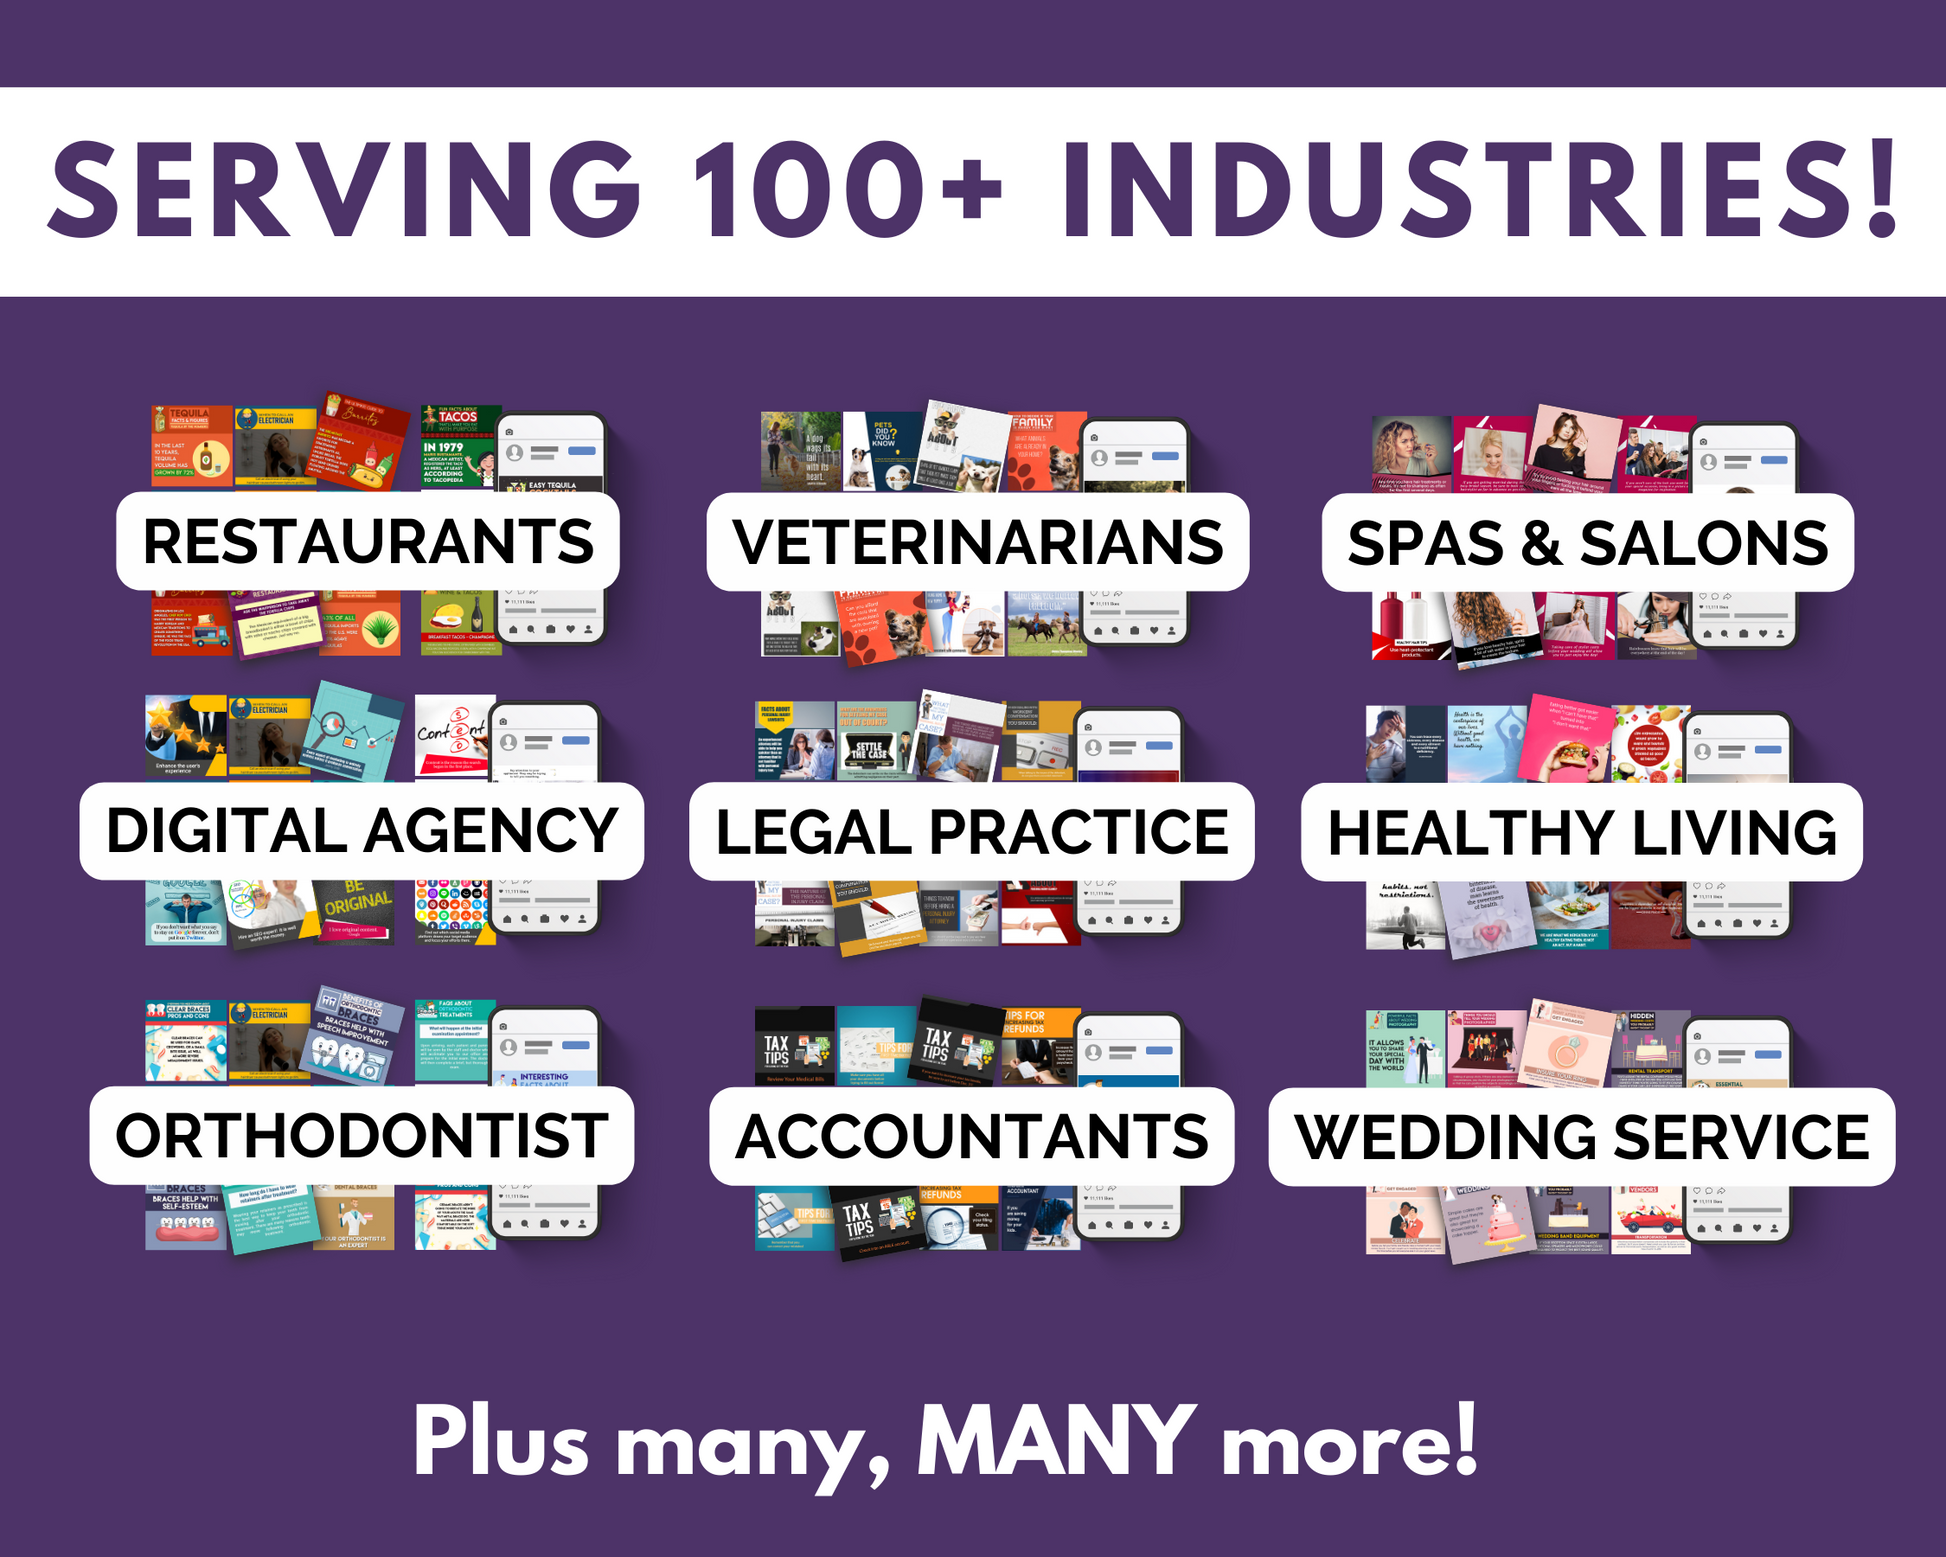 A Get Socially Inclined Socially Suite Membership serving 100+ industries with a focus on online presence.